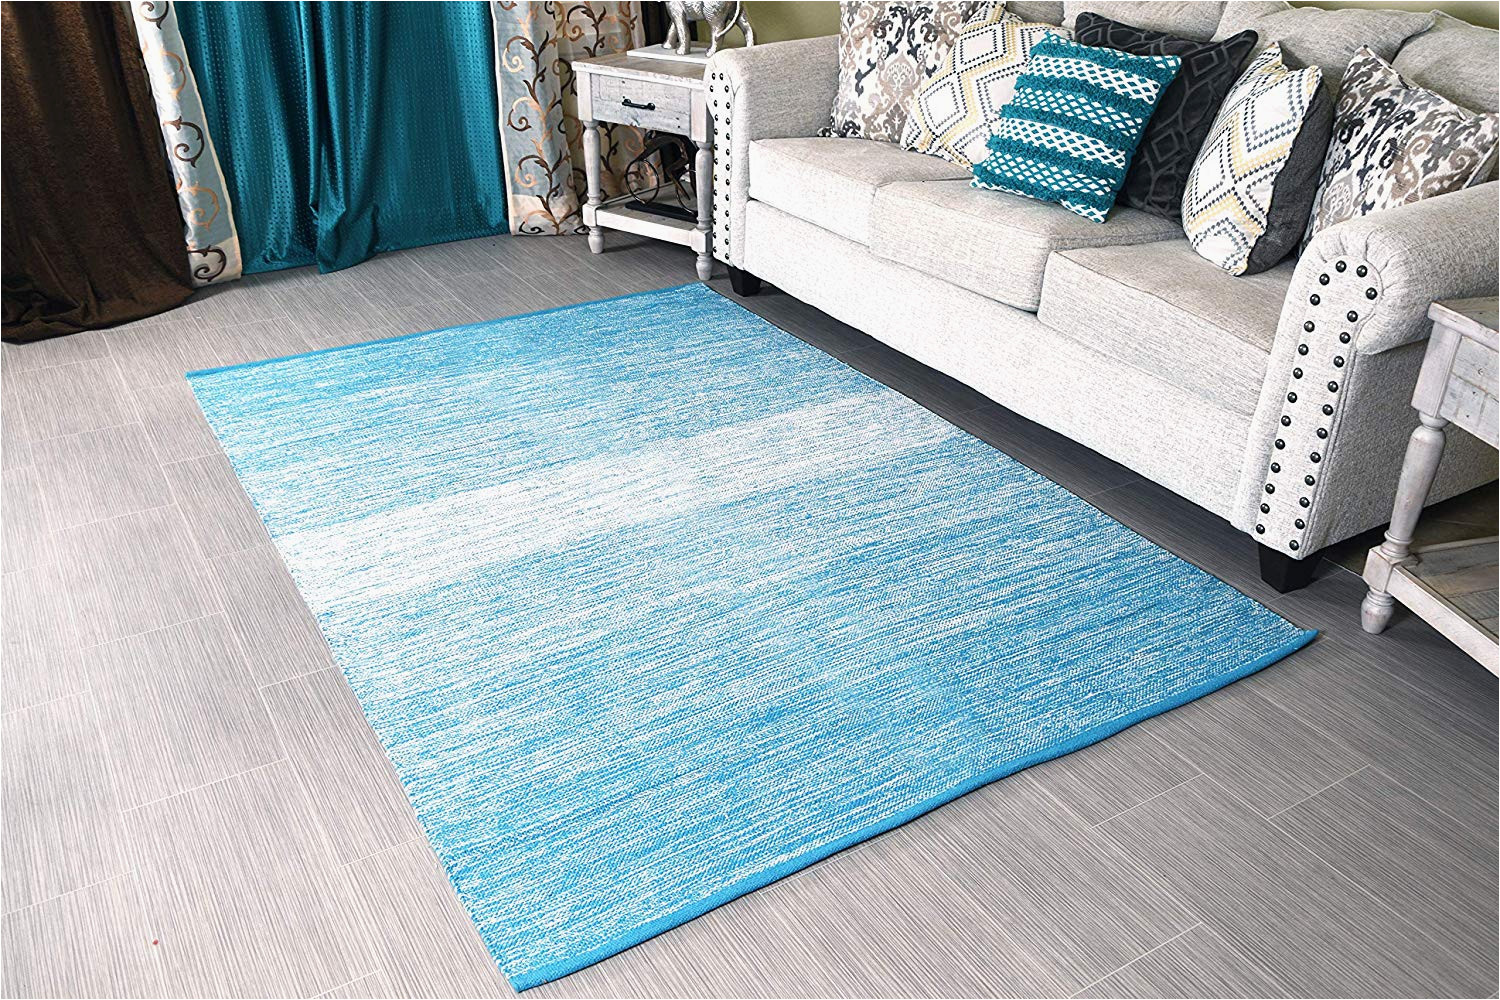 Blue and White area Rugs 5×7 5×7 area Rug Turquoise Blue White for Living Room